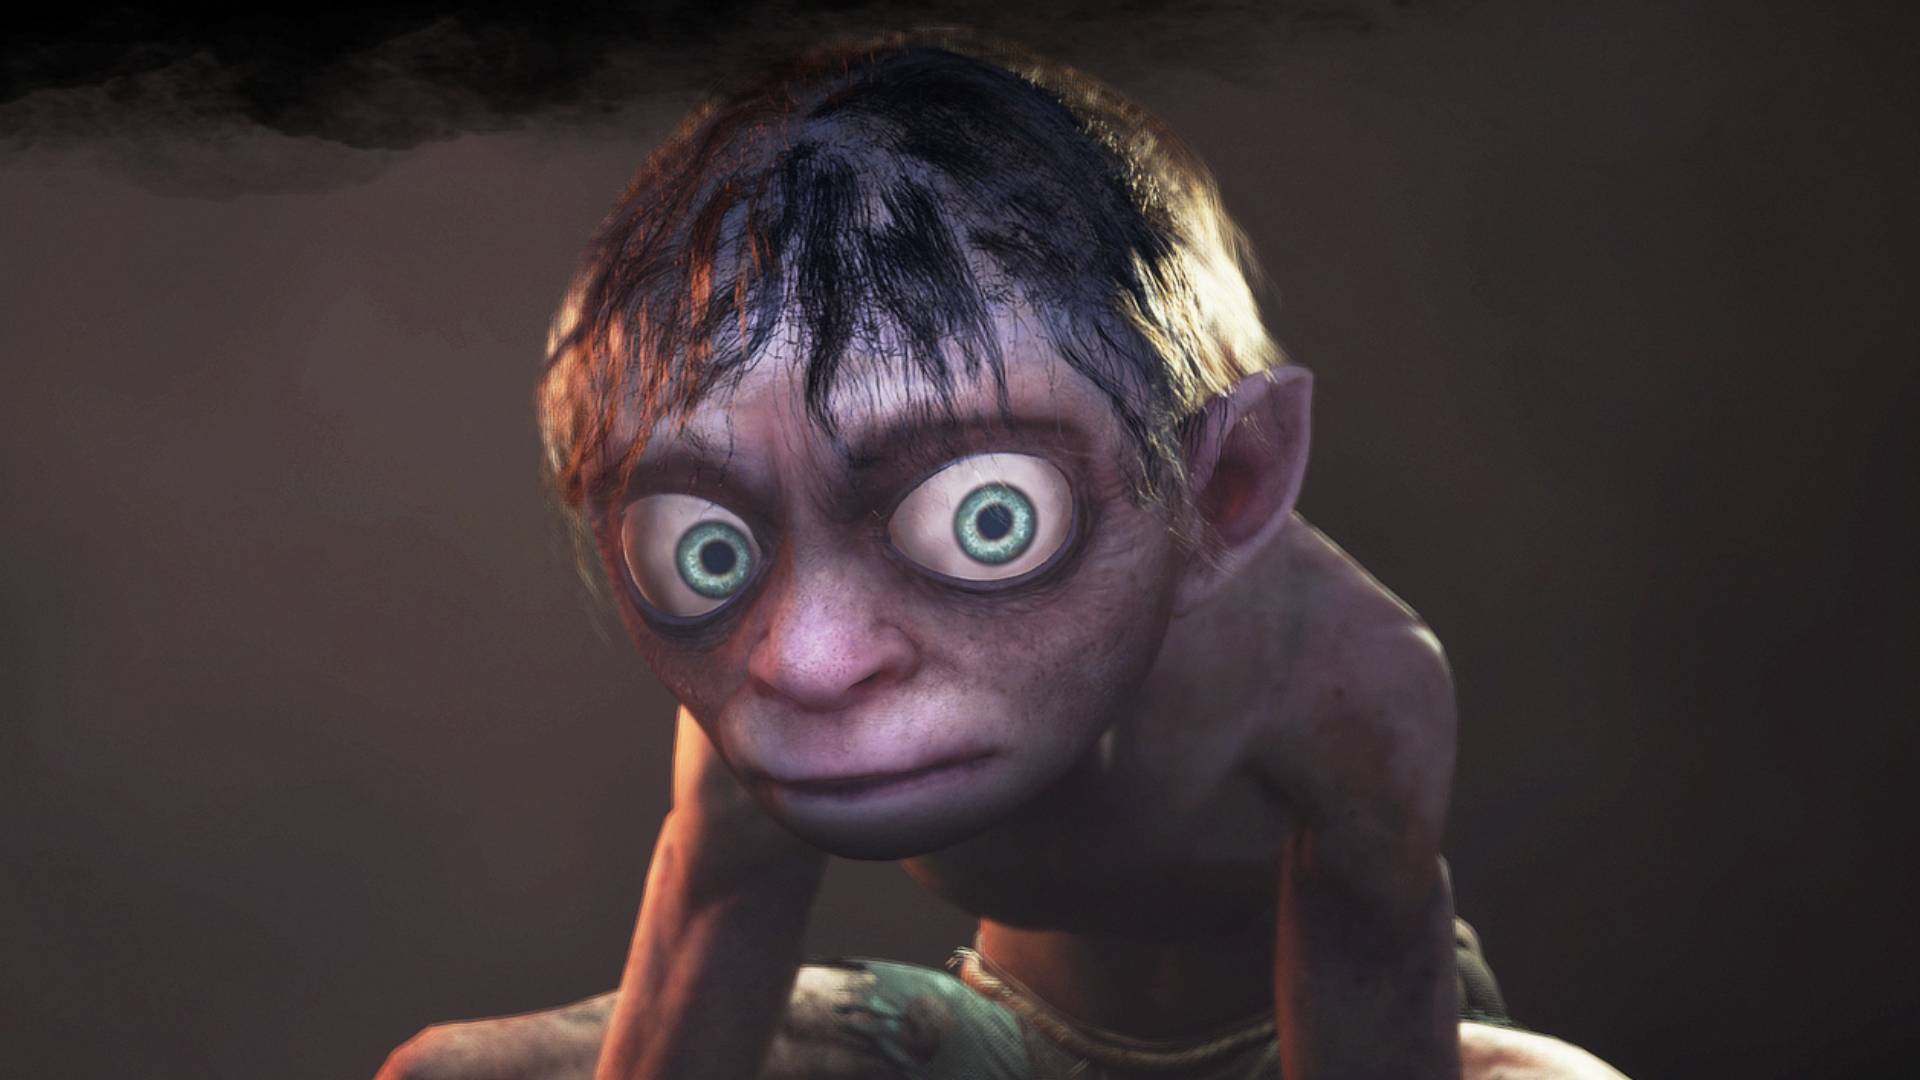 Here's a brand-new look at Lord of the Rings: Gollum (and our favourite  wizard)